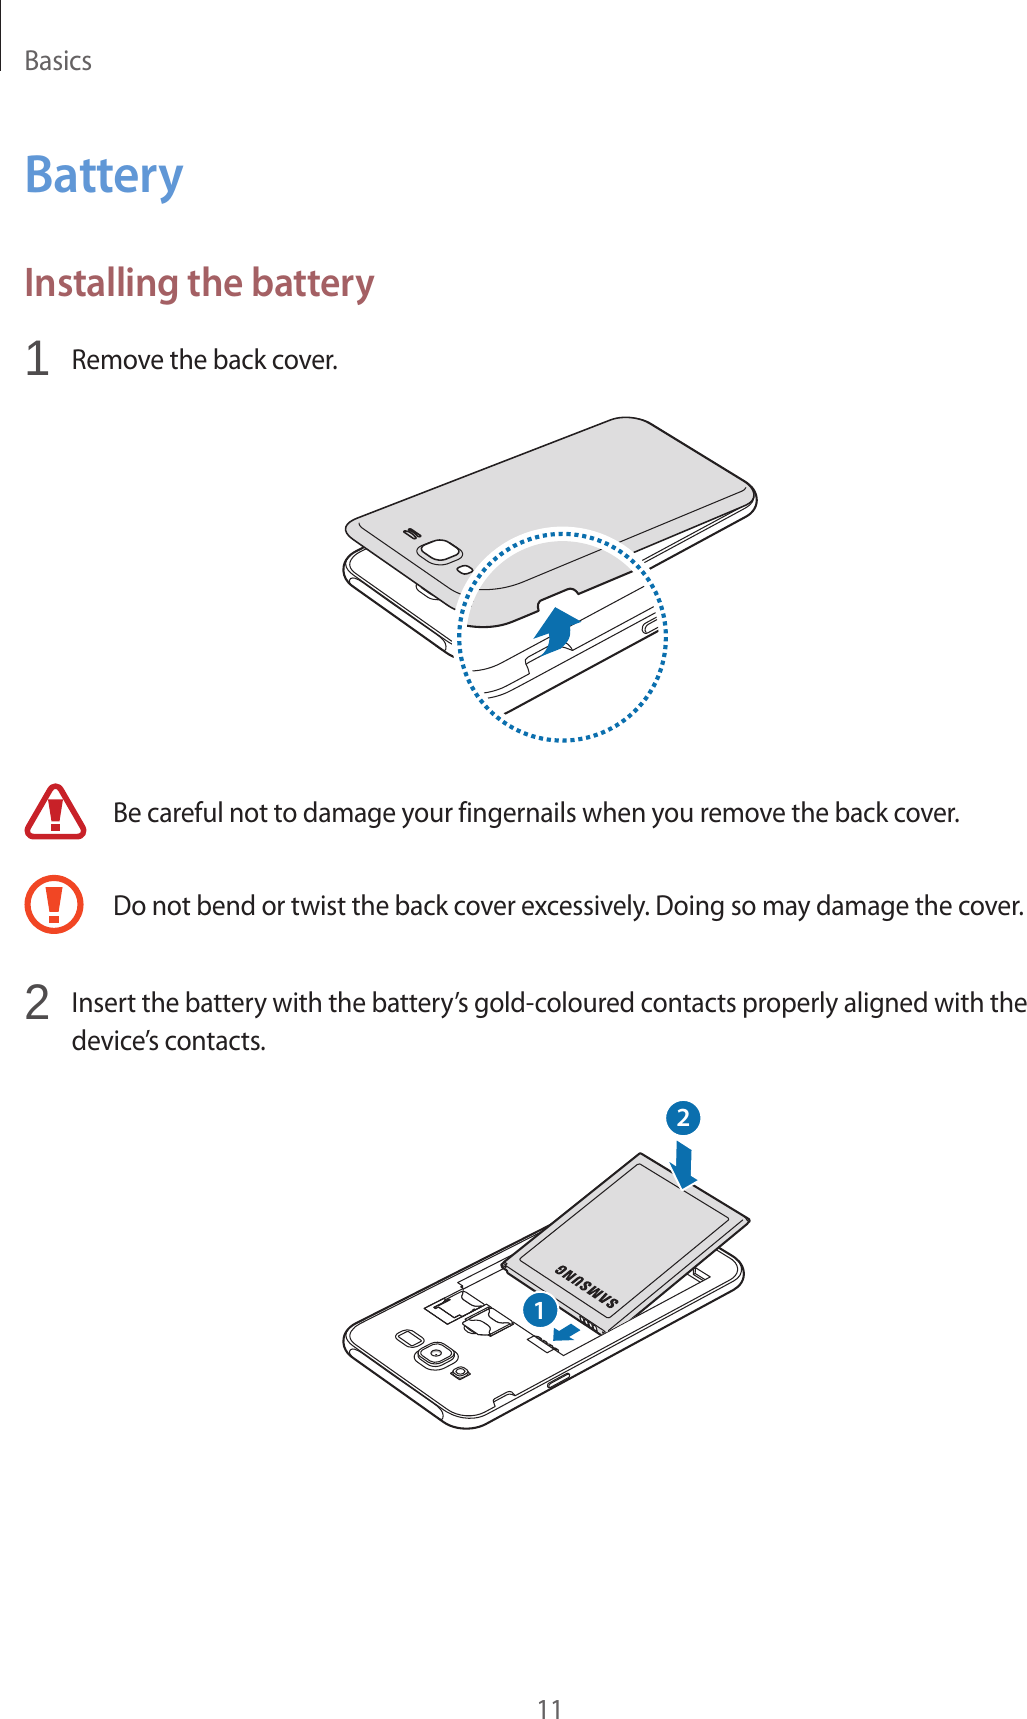 Basics11BatteryInstalling the battery1  Remove the back cover.Be careful not to damage your fingernails when you remove the back cover.Do not bend or twist the back cover excessively. Doing so may damage the cover.2  Insert the battery with the battery’s gold-coloured contacts properly aligned with the device’s contacts.12